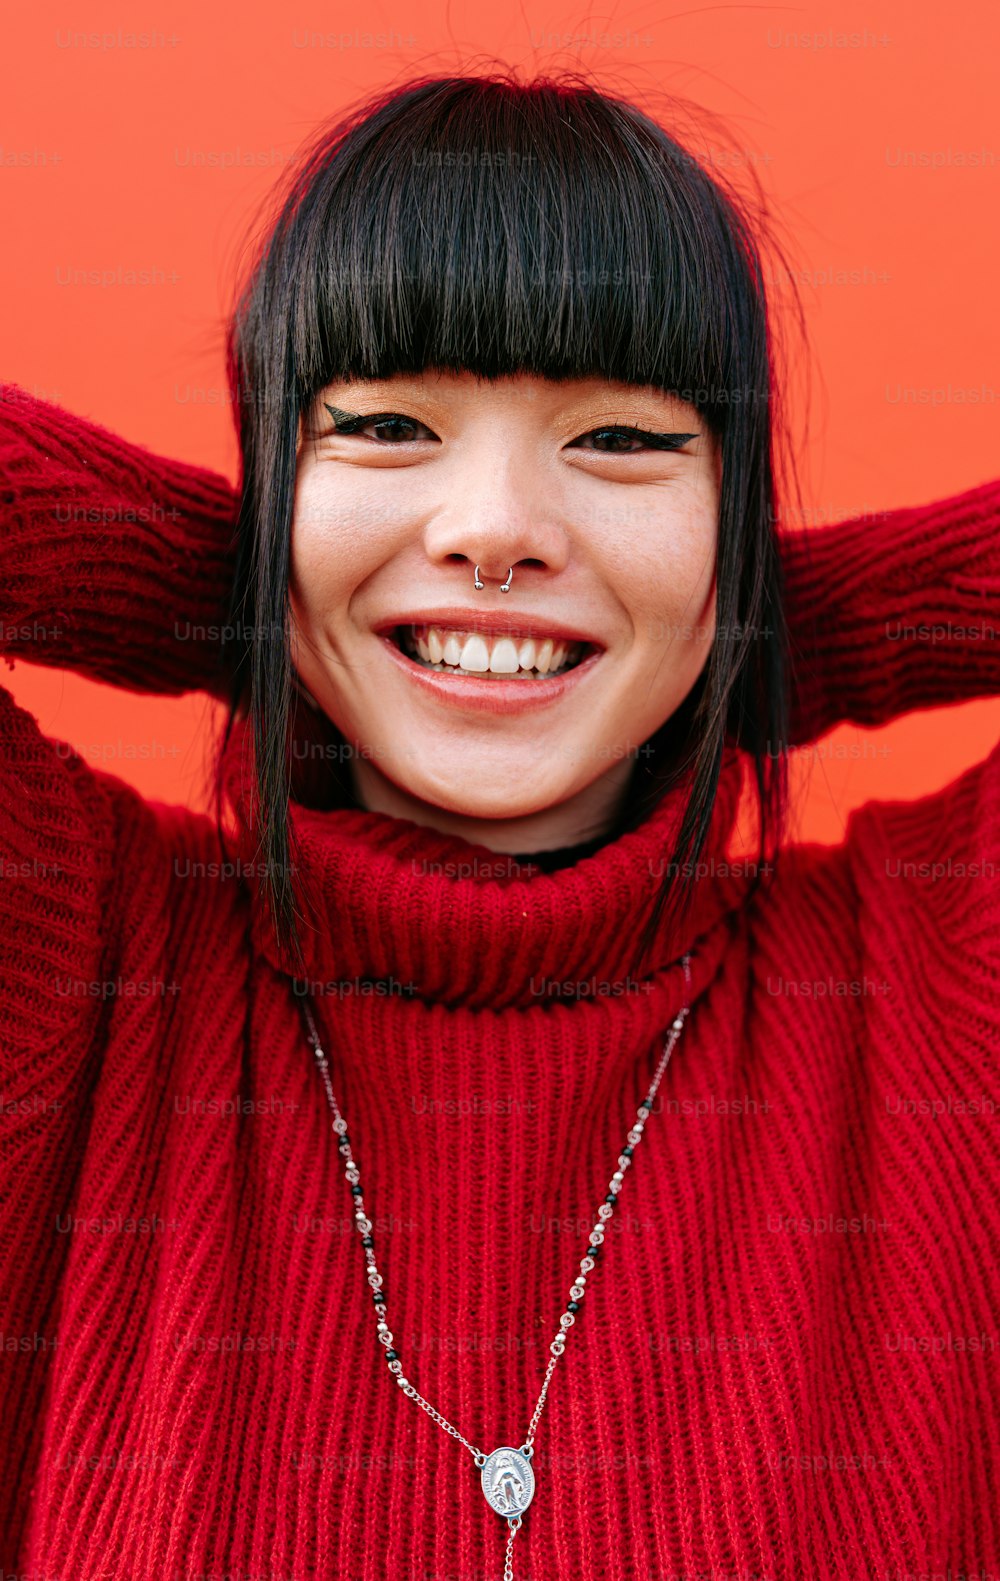 a woman wearing a red sweater and a silver necklace